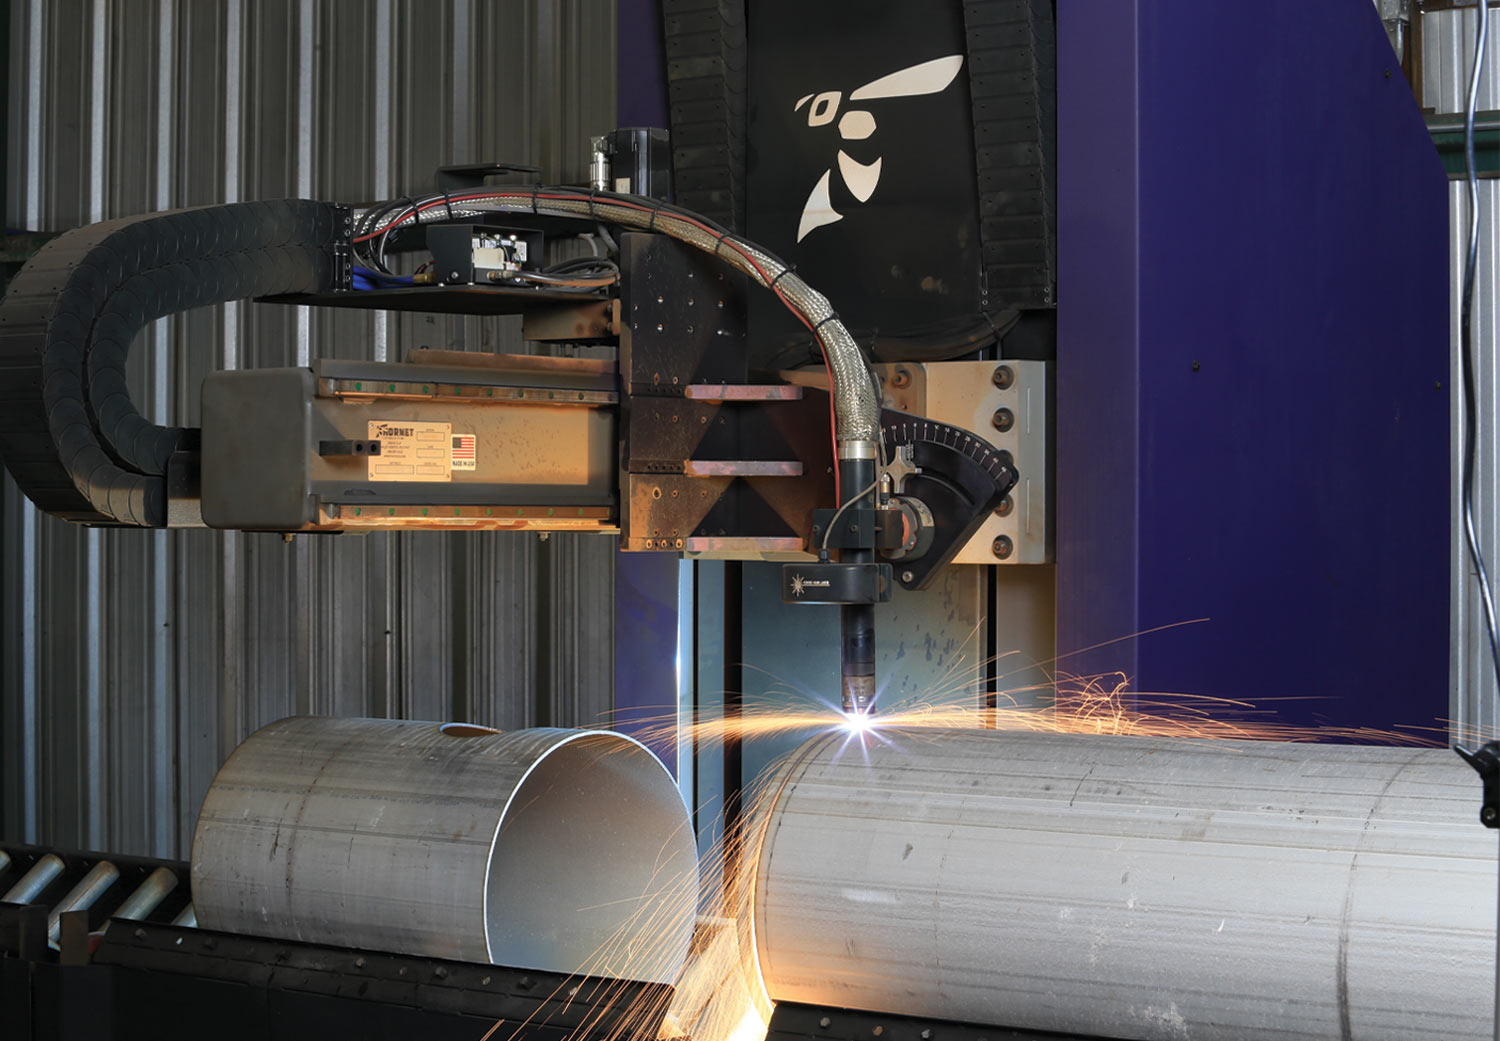 Roto Hornet 1000 CNC plasma pipe cutter at work